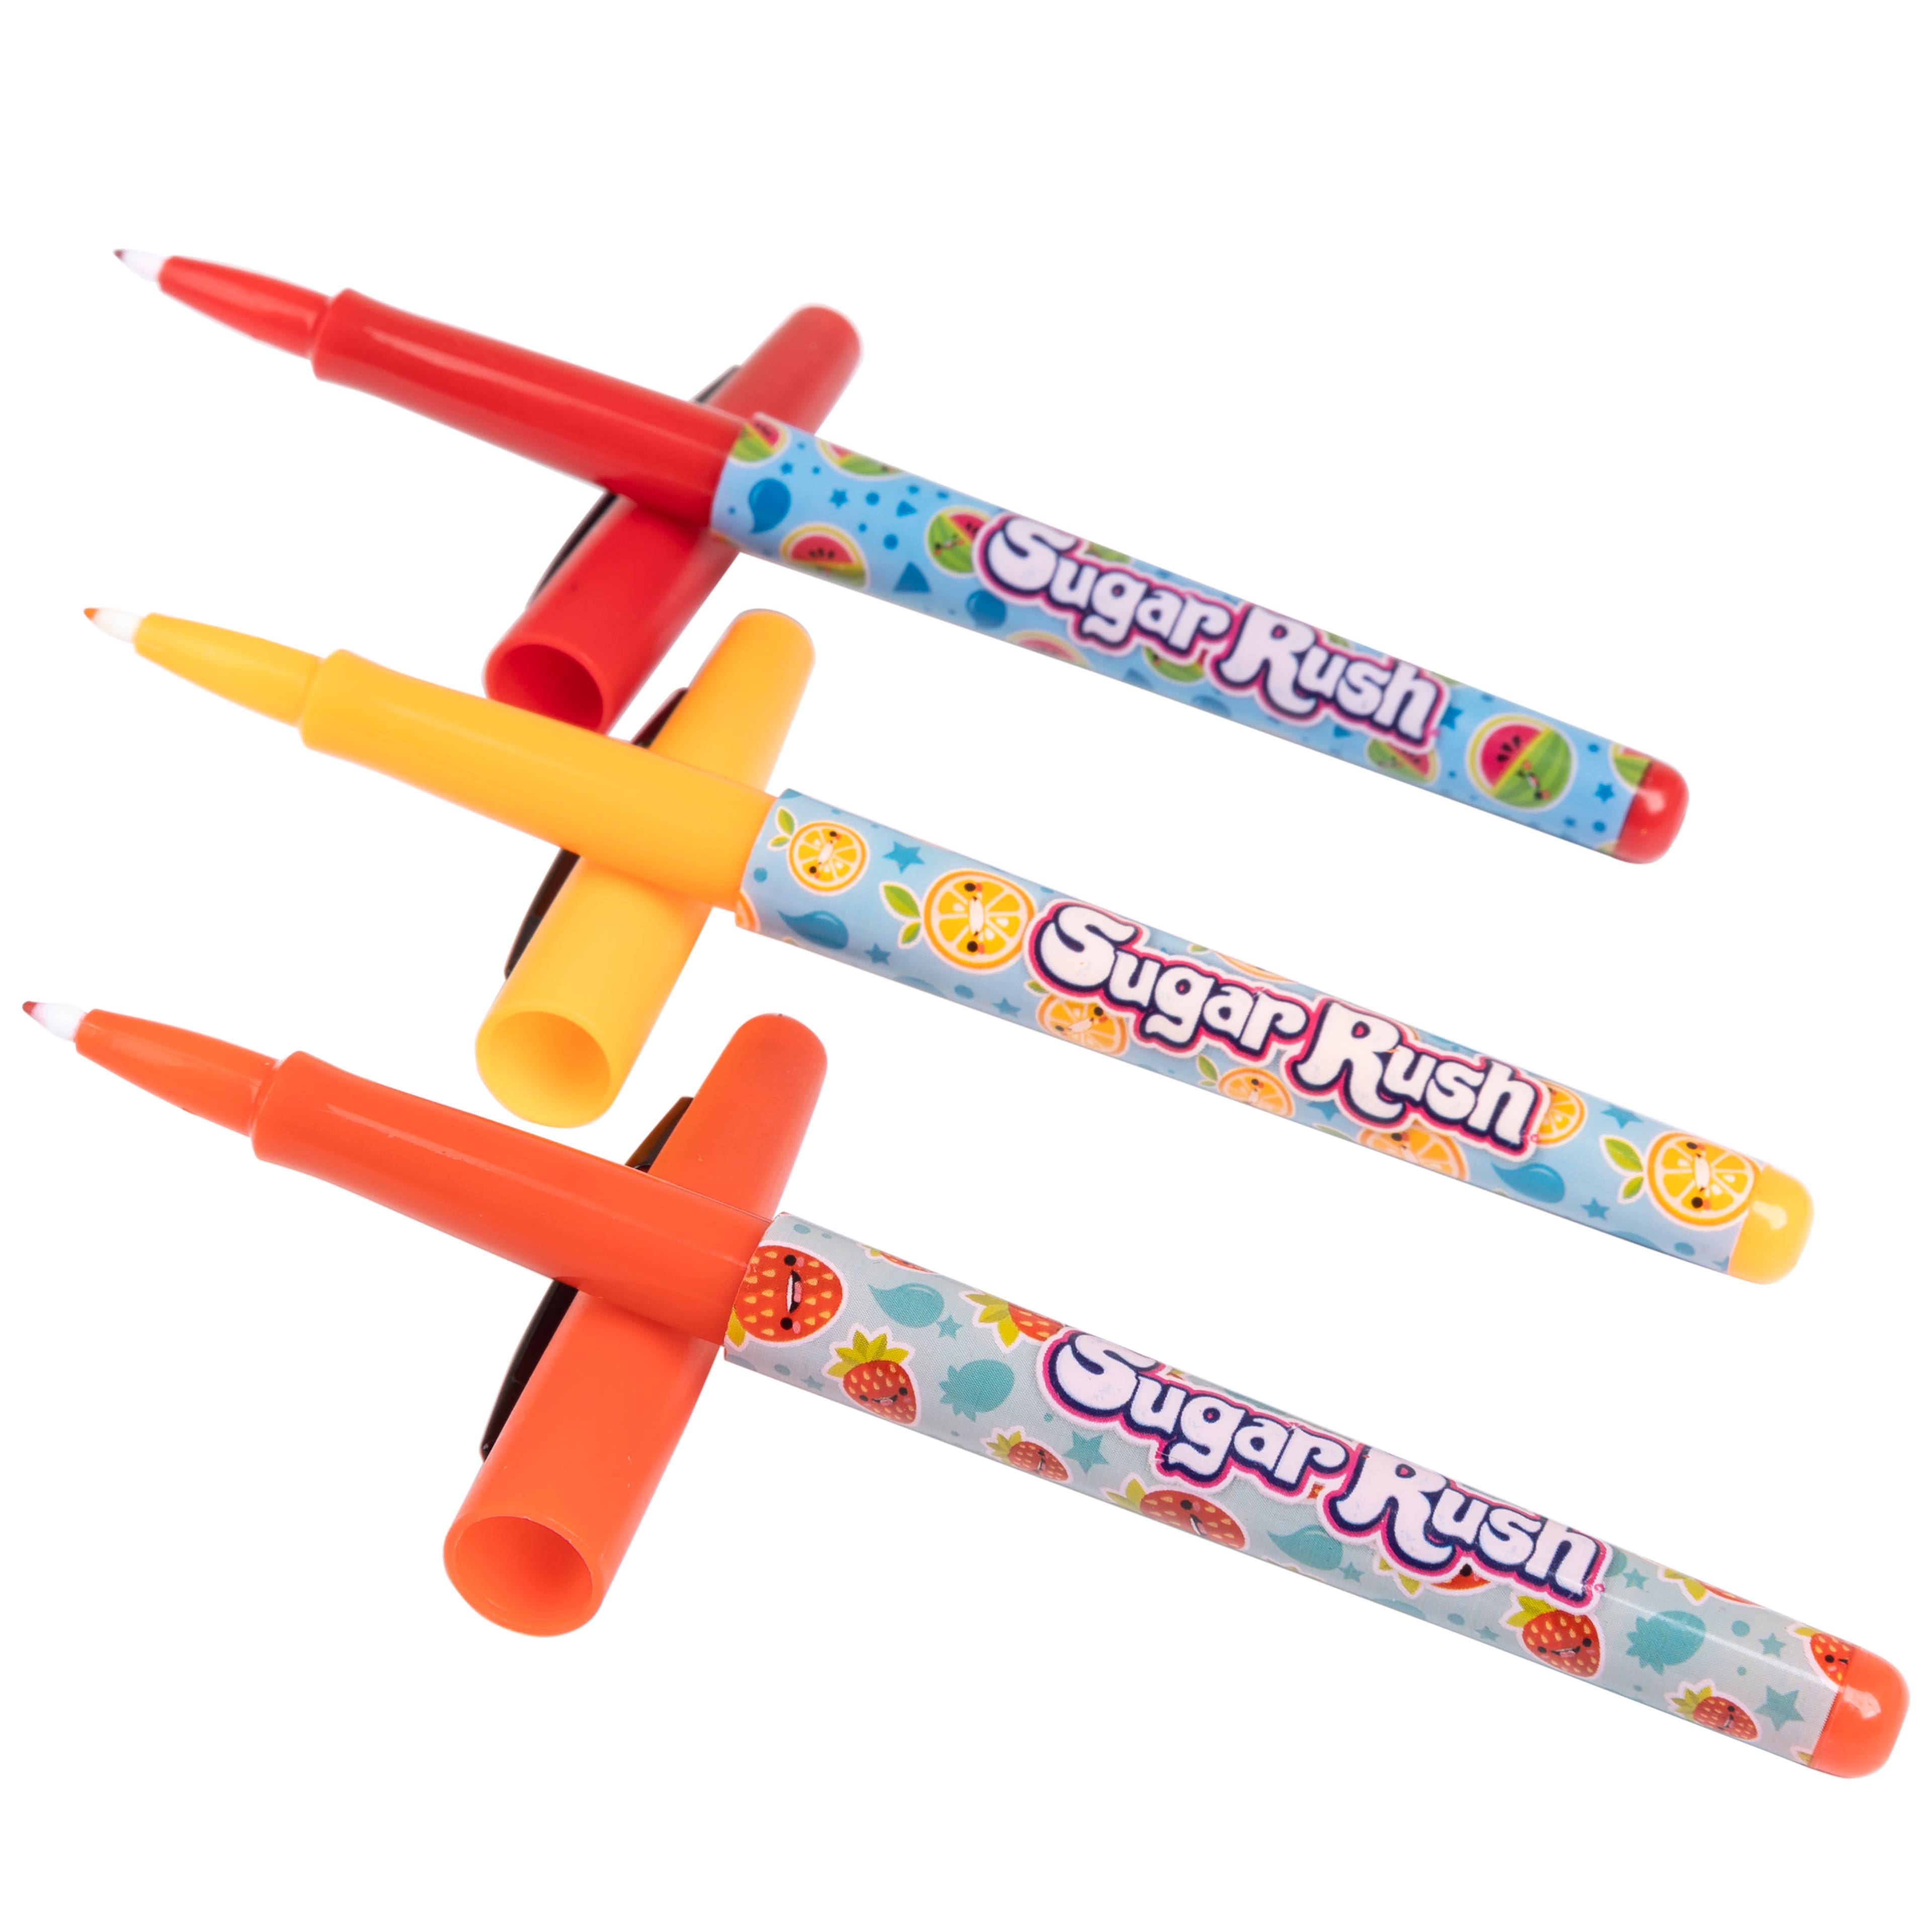 Sugar Rush Felt Tip Pens for Kids - Candy Scented Colored Pens - Fine Point  Pens - Teacher Supplies - For Ages 3 and Up - 24 Count